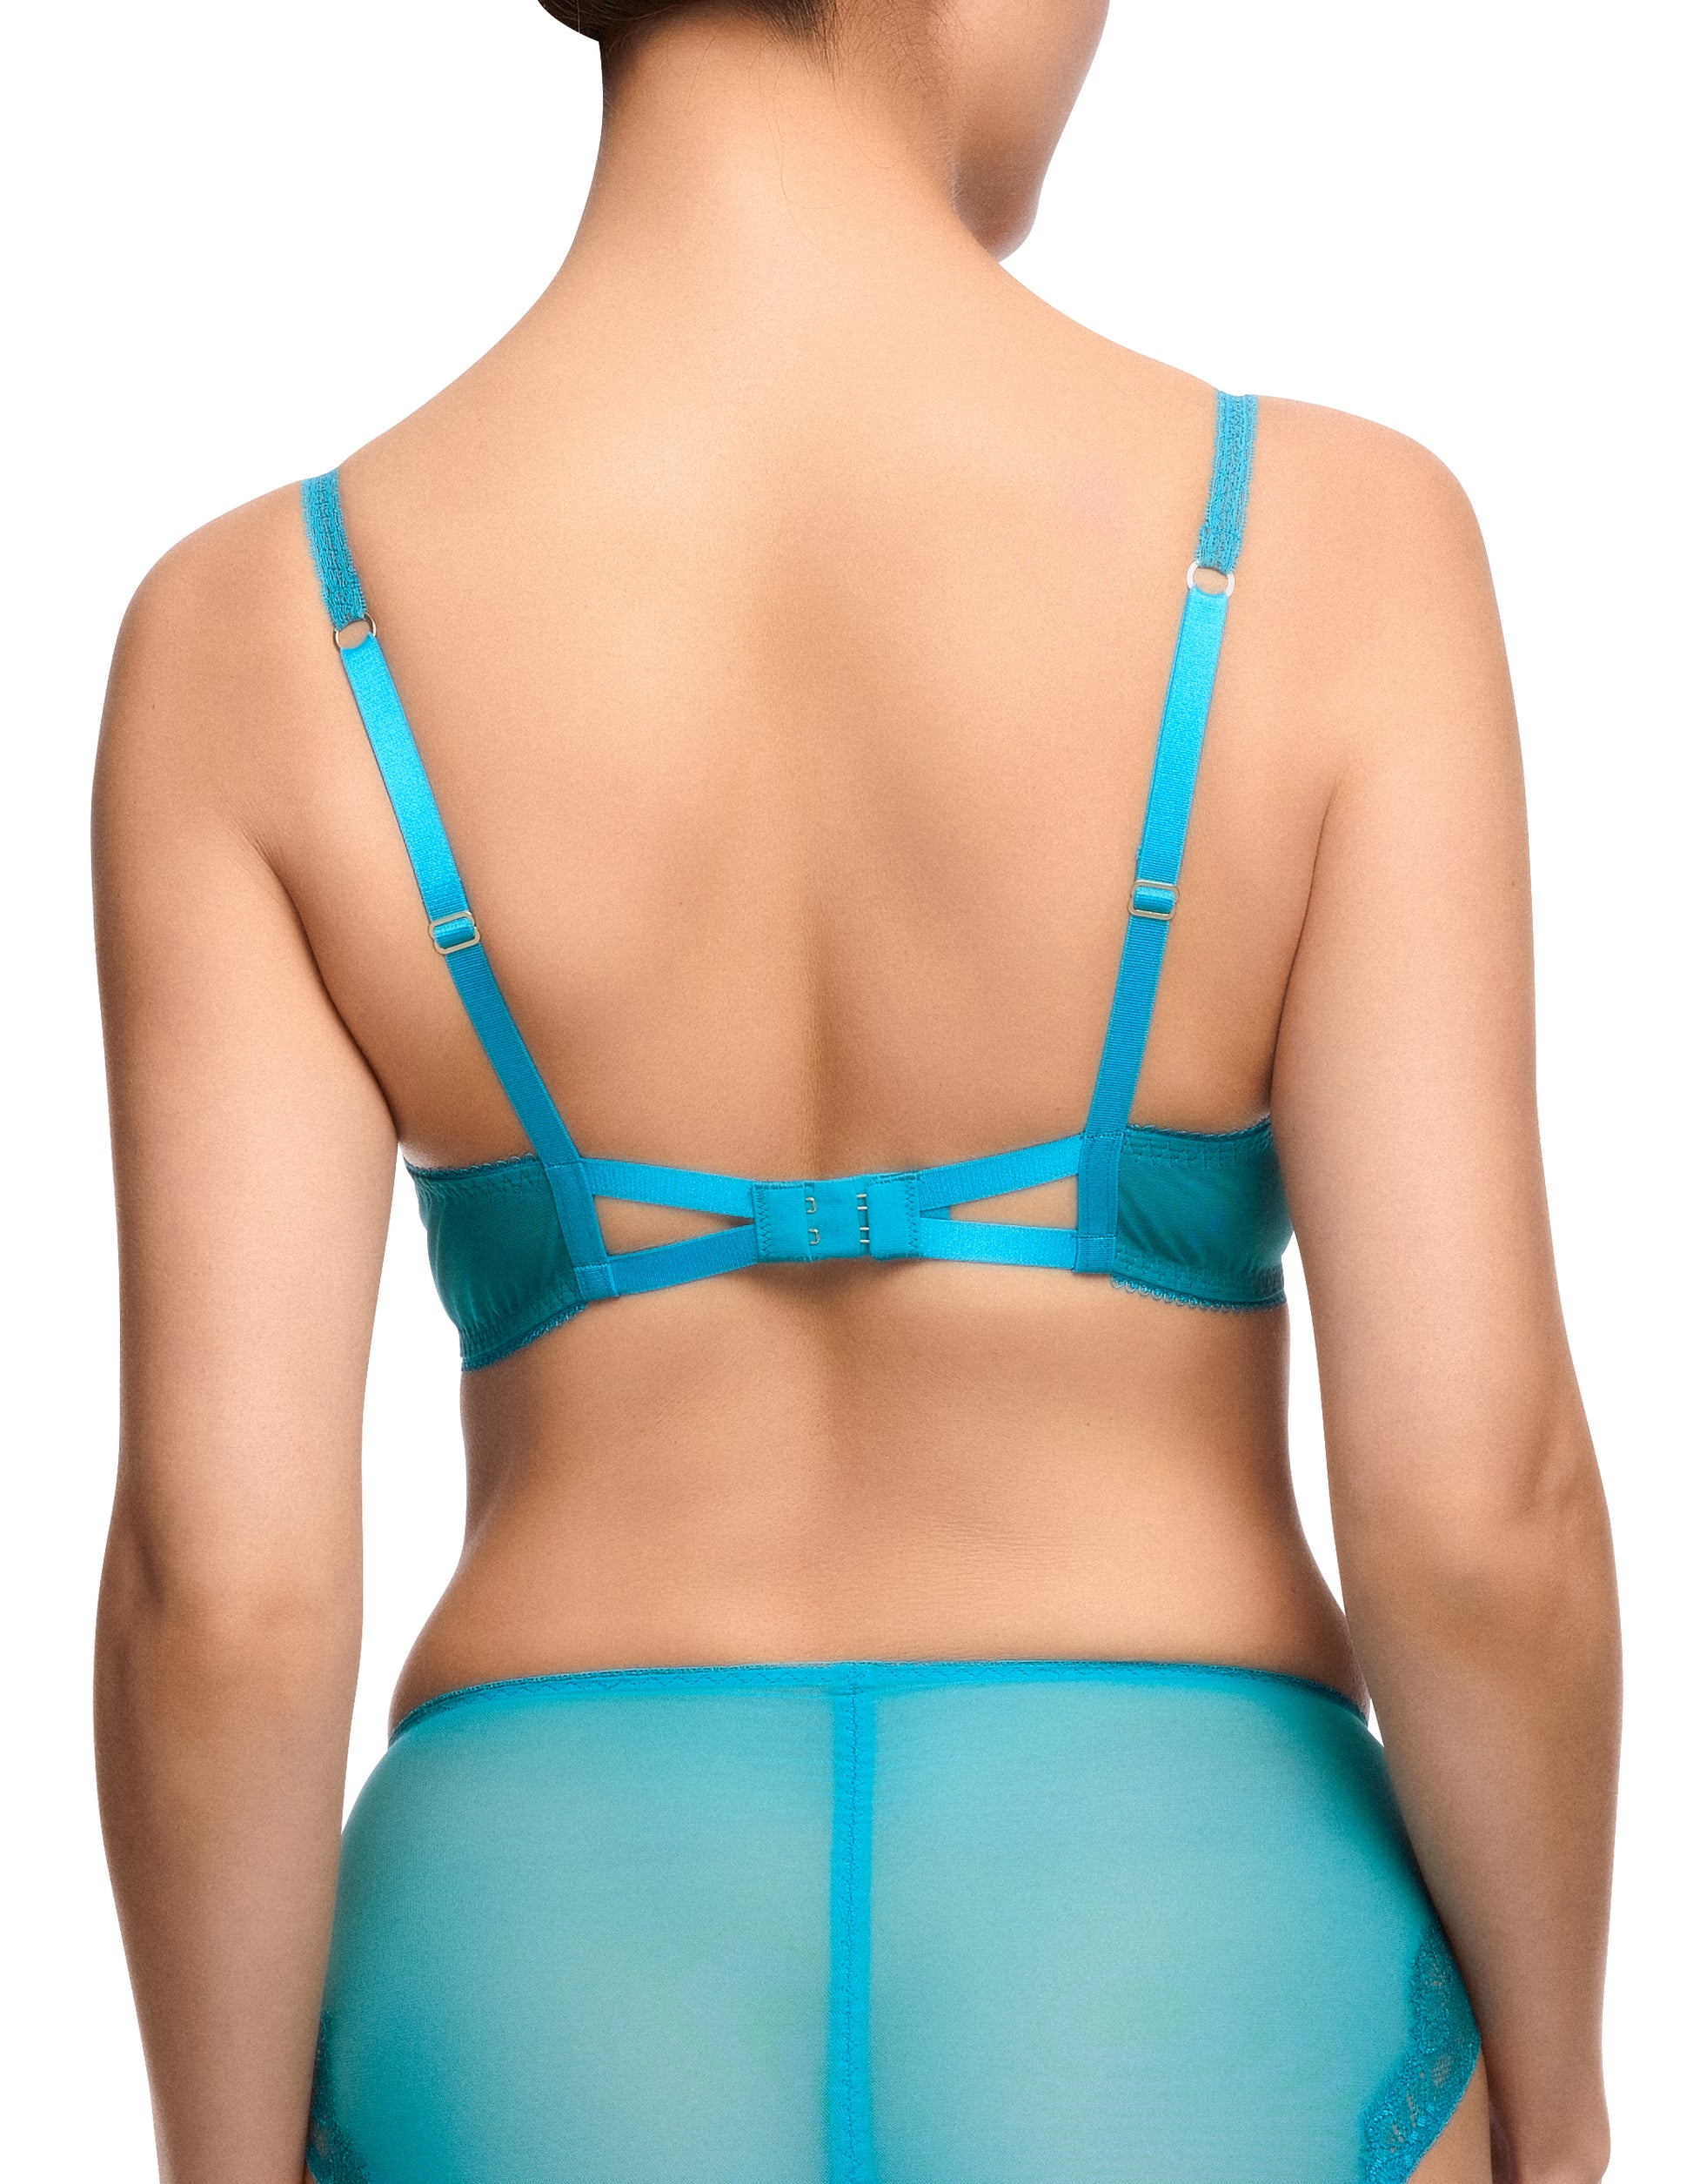 Dita von Teese Savoir Faire G-String in Turquoise FINAL SALE (40% Off) -  Busted Bra Shop